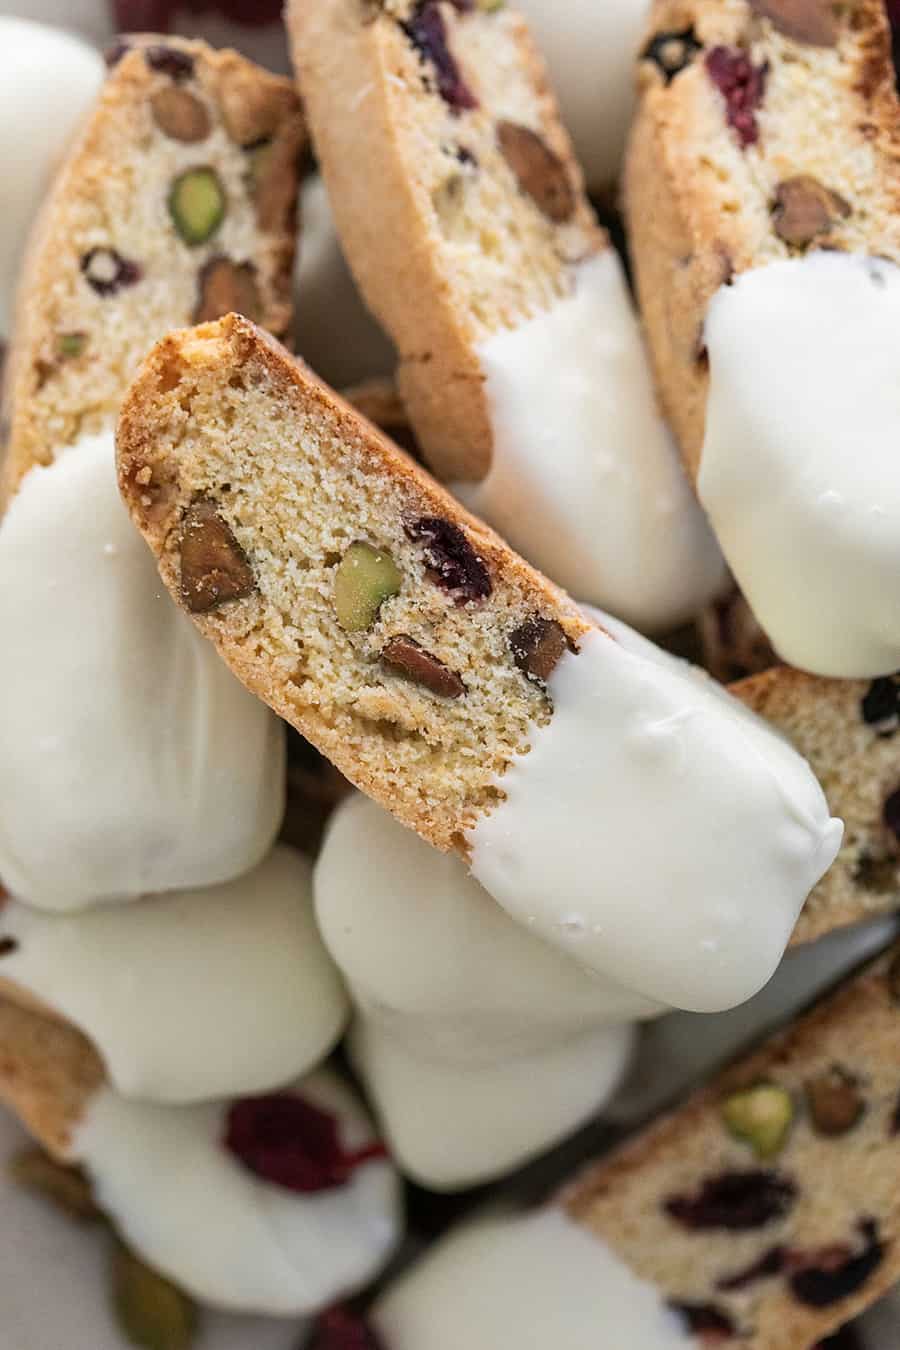 Biscotti recipe with cranberries and pistachios, dipped in white chocolate.